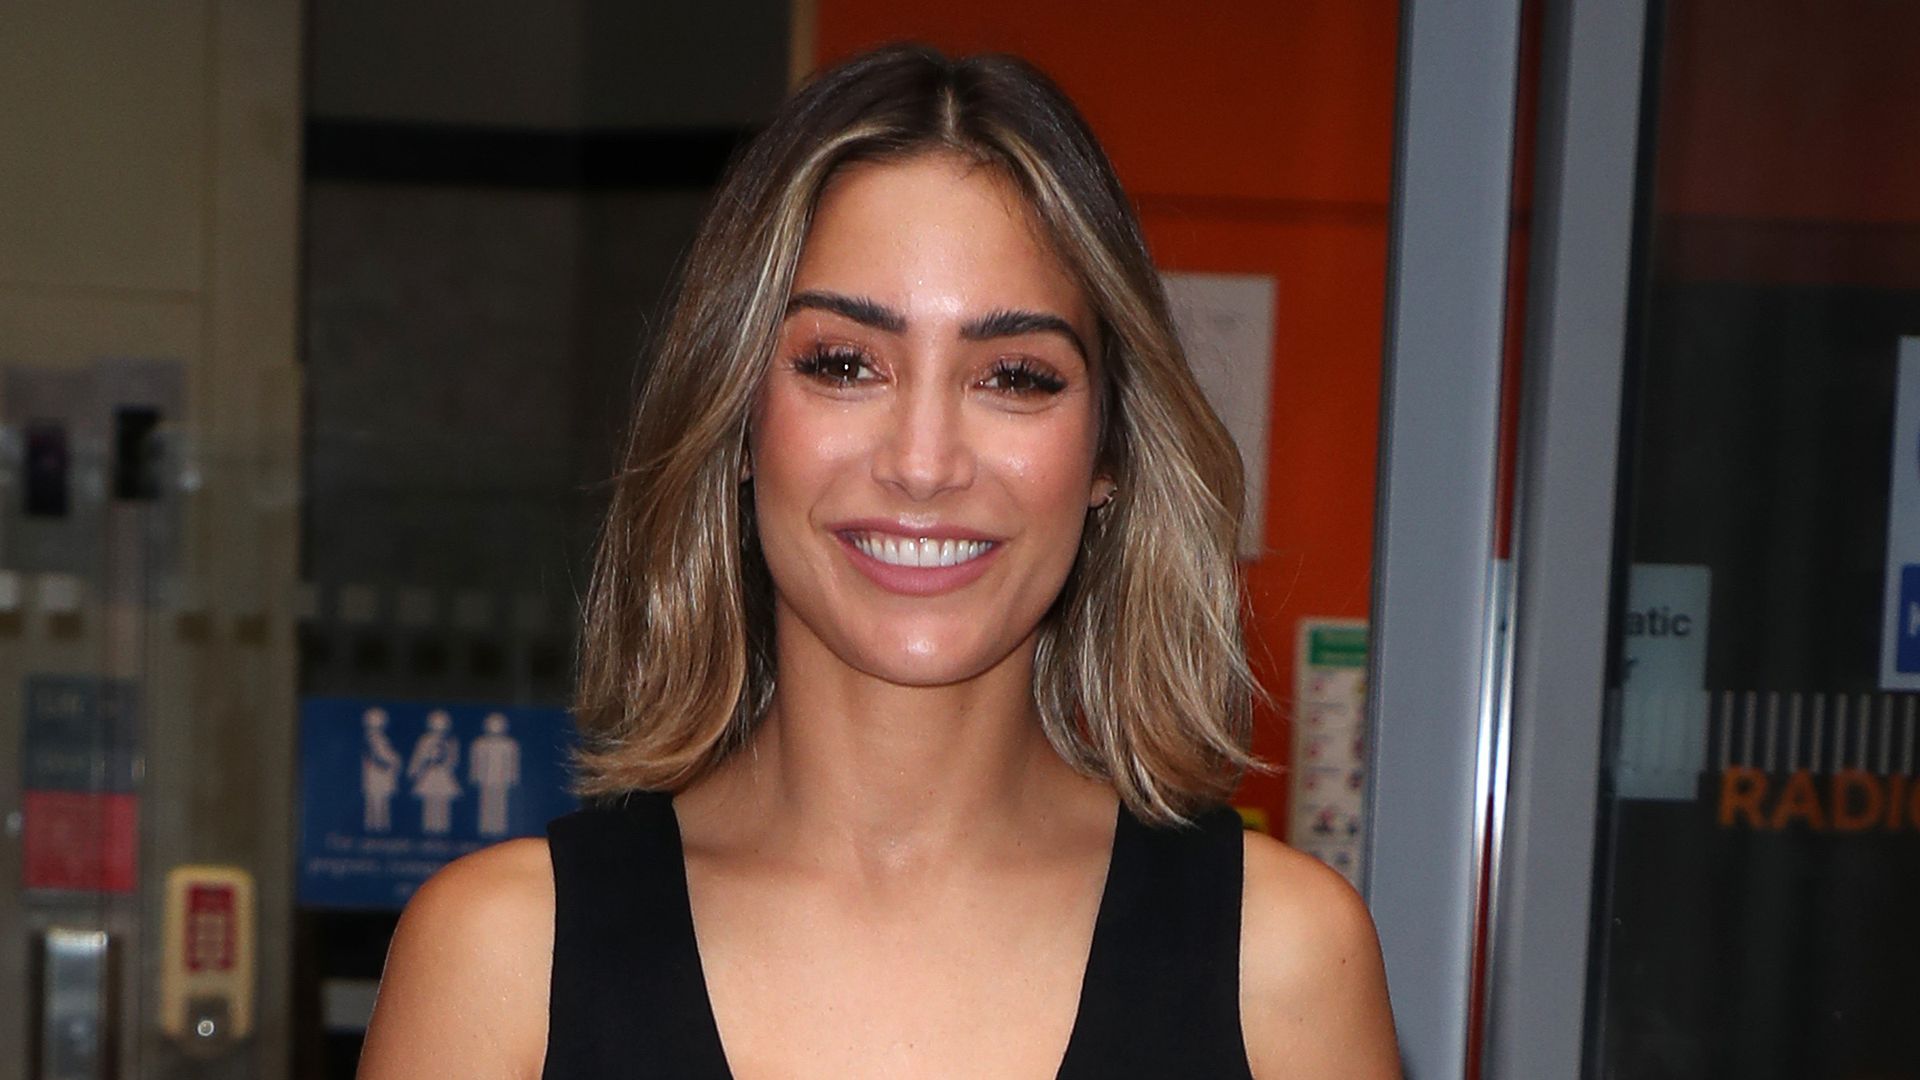 Frankie Bridge’s ‘amazing’ new necklace is super special - and it's under £100